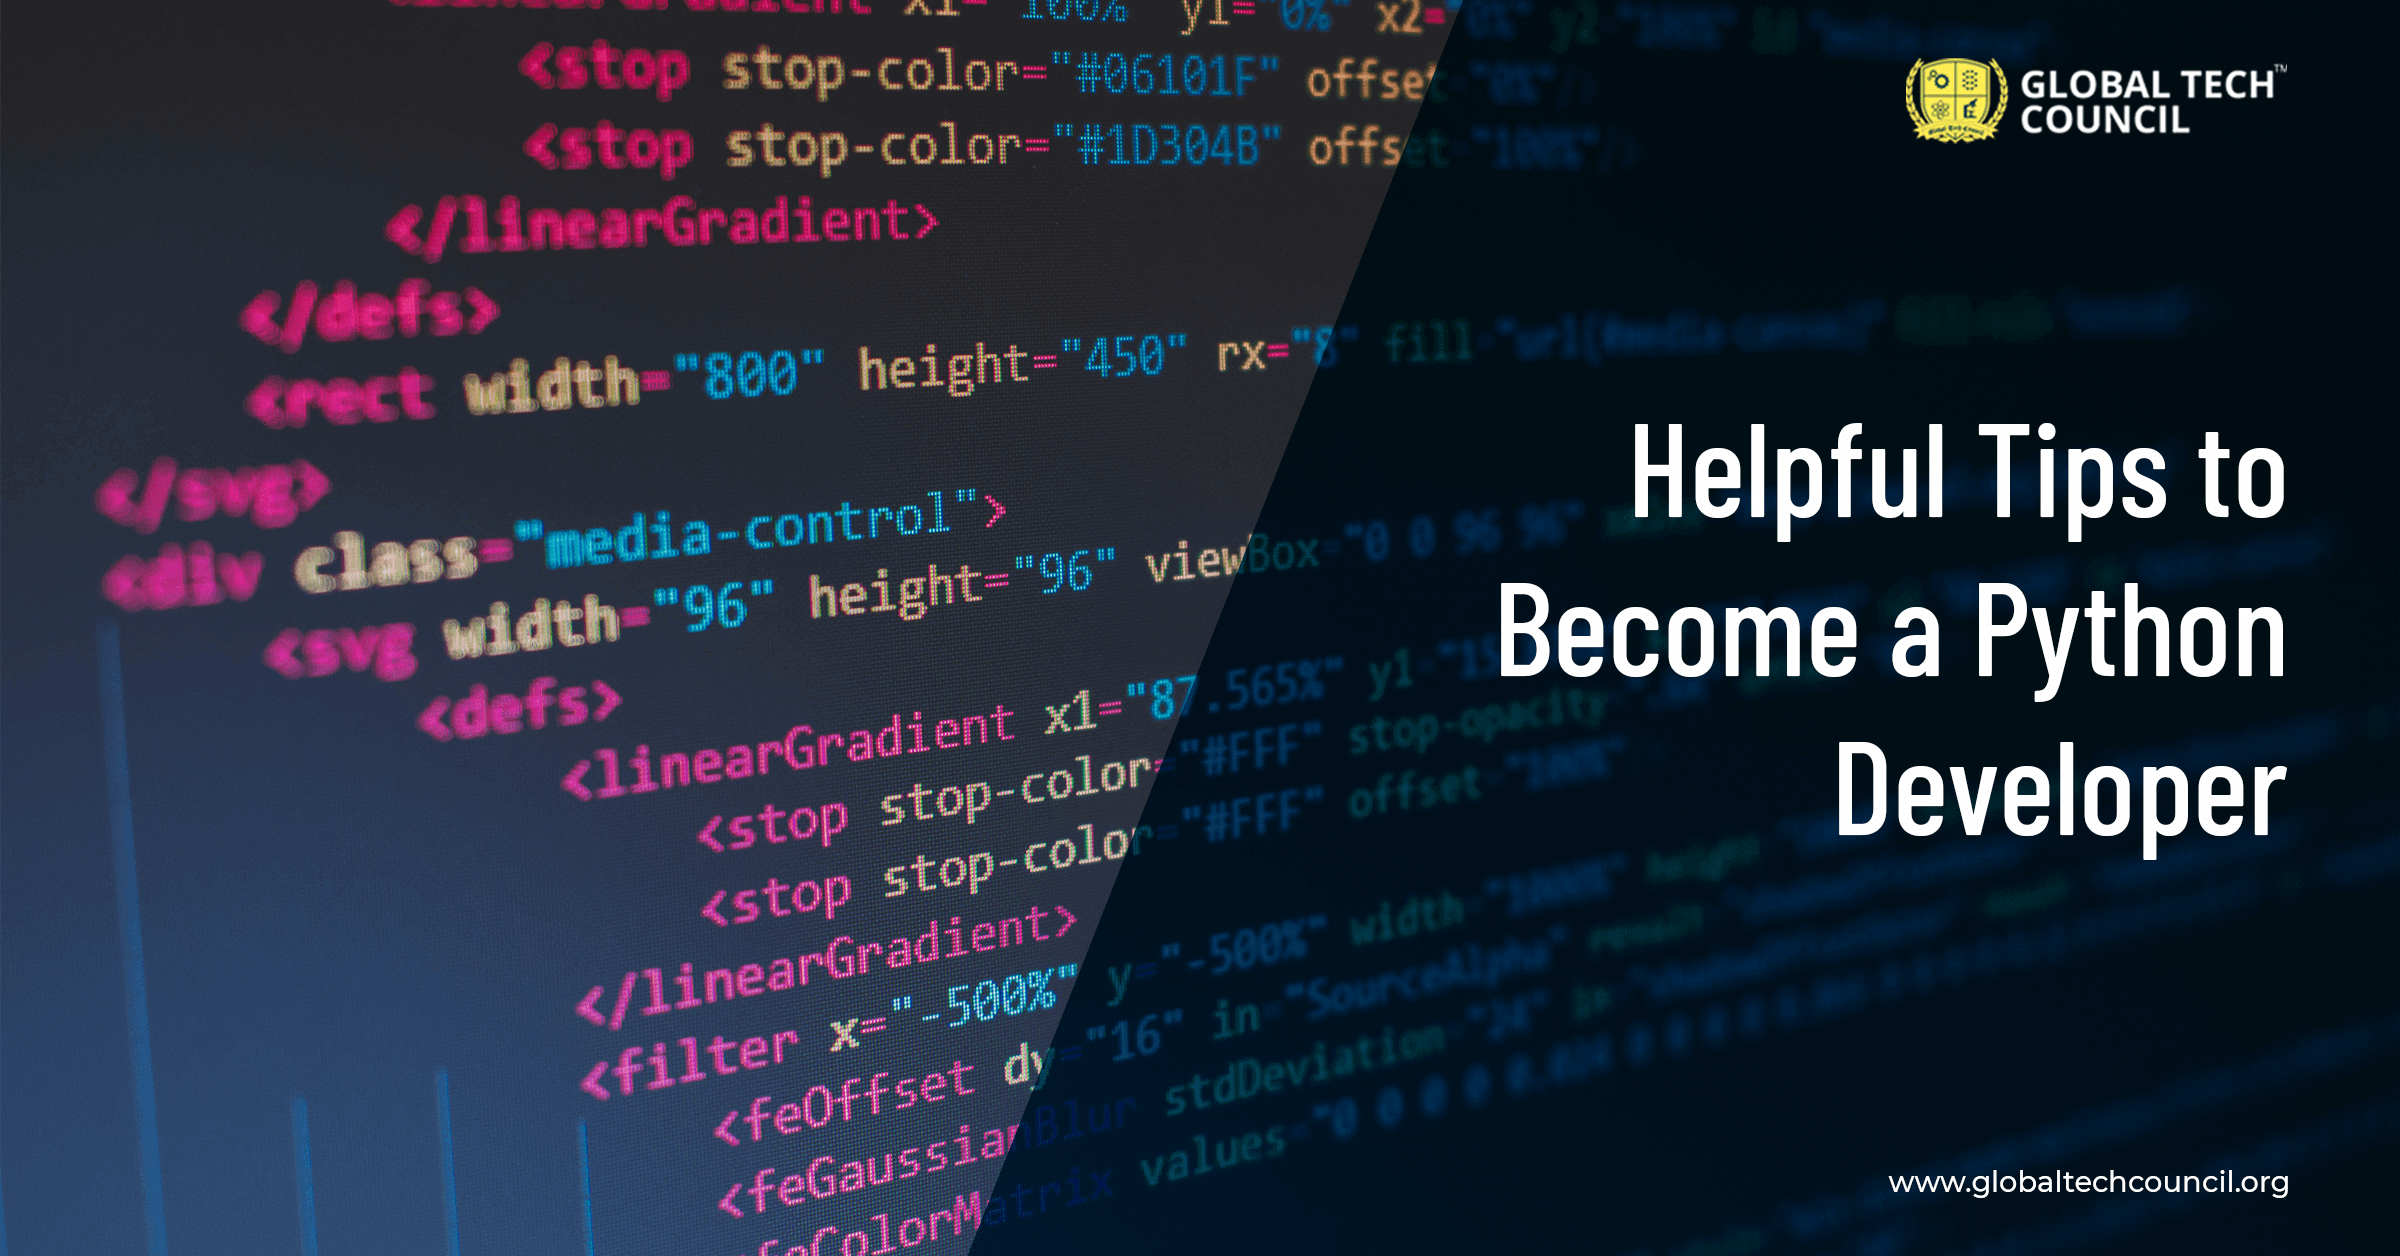 Helpful Tips to Become a Python Developer